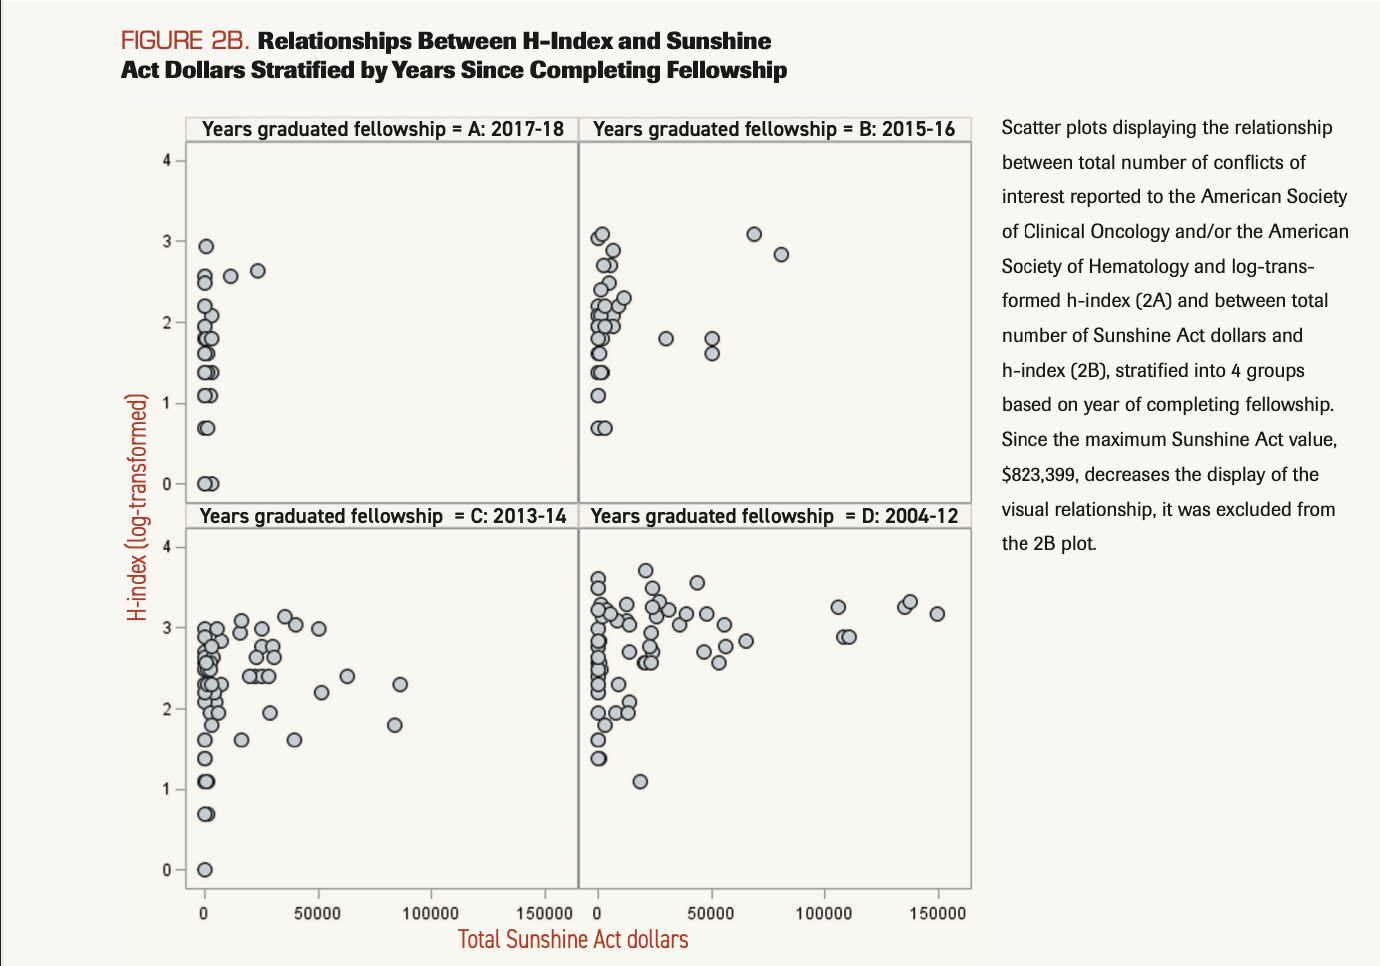 FIGURE 2B. Relationships Between H-Index and Sunshine Act Dollars Stratified by Years Since Completing Fellowship